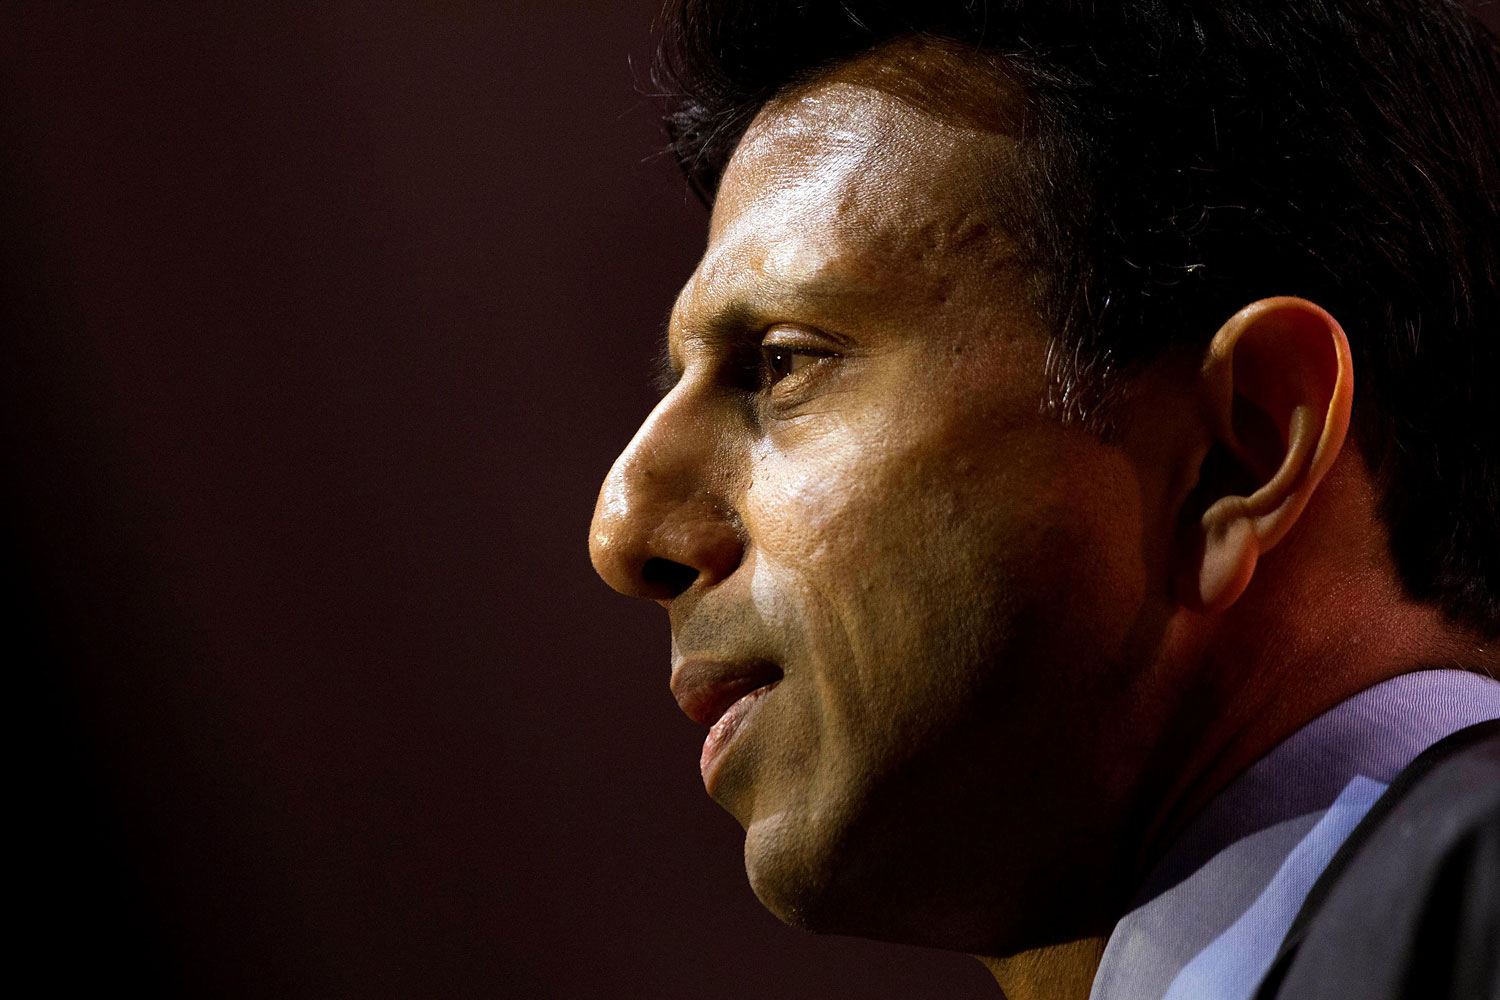 Governor Bobby Jindal of Louisiana speaks during an address to delegates at the Conservative Political Action Conference, National Harbor, Maryland, March 6, 2014.